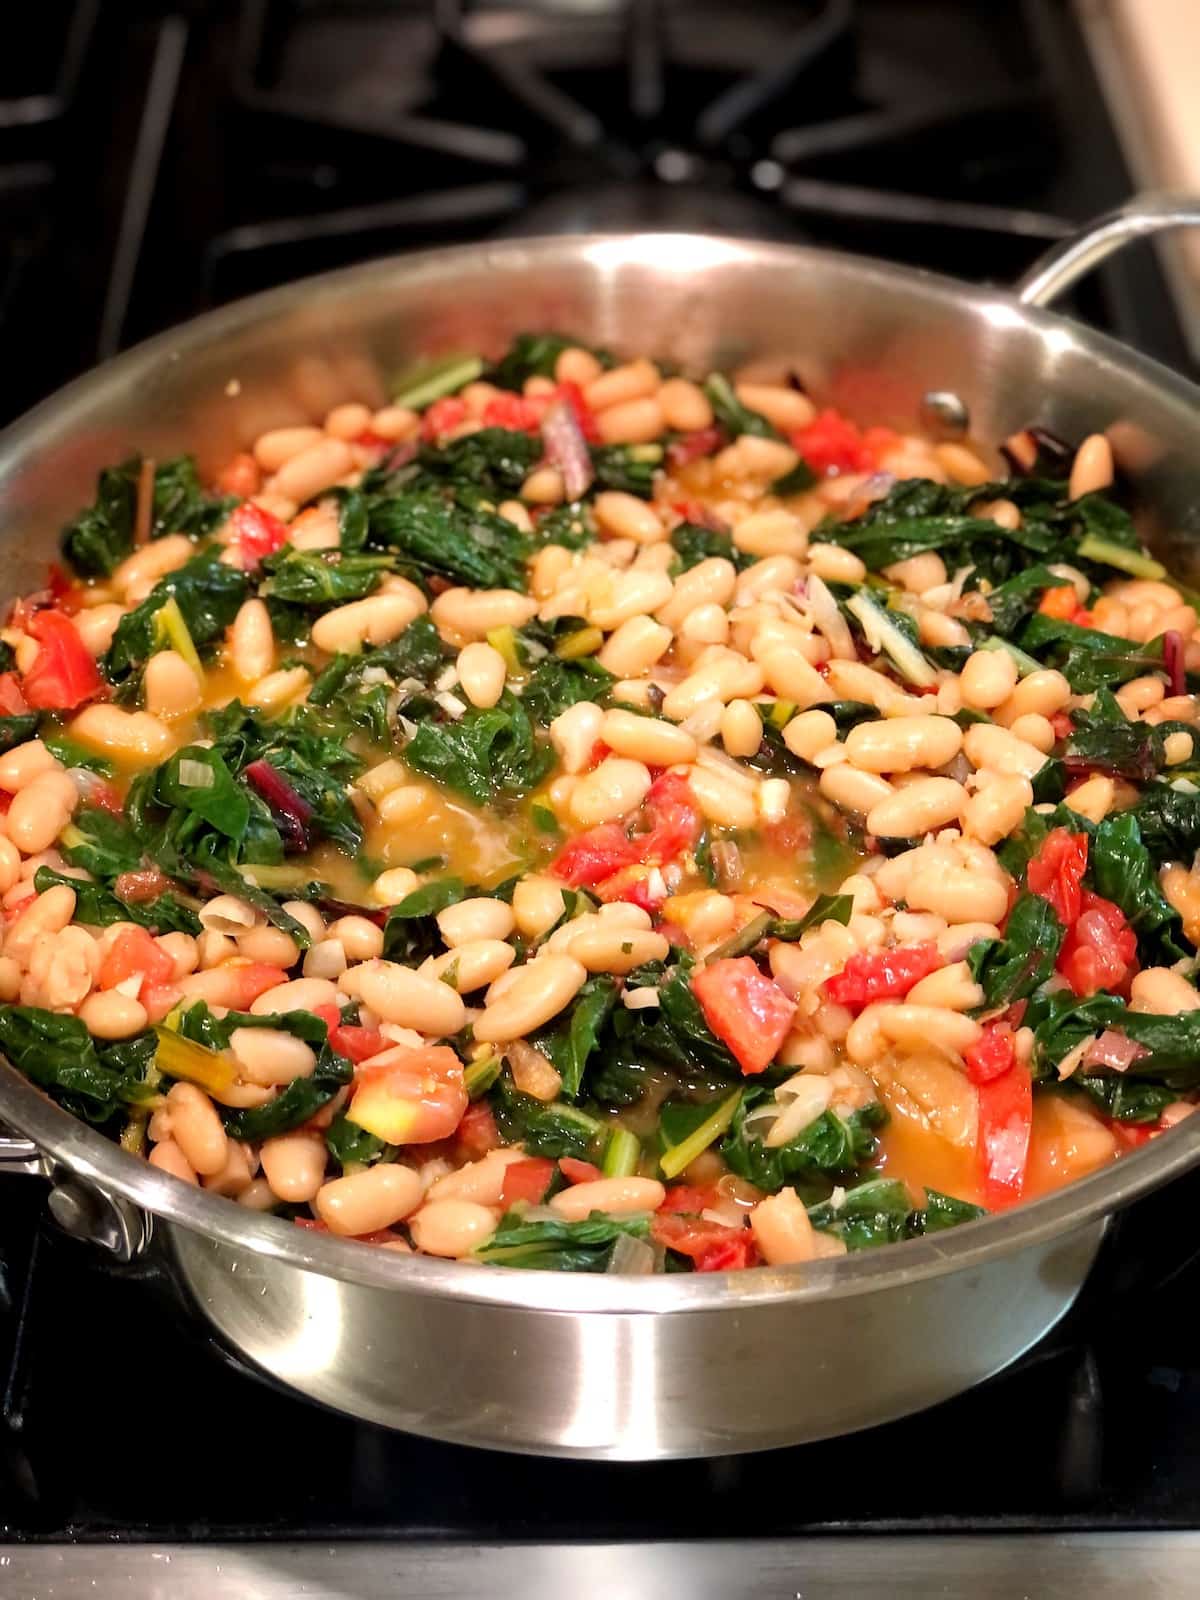 white beans and chard in a saute pan on the stove